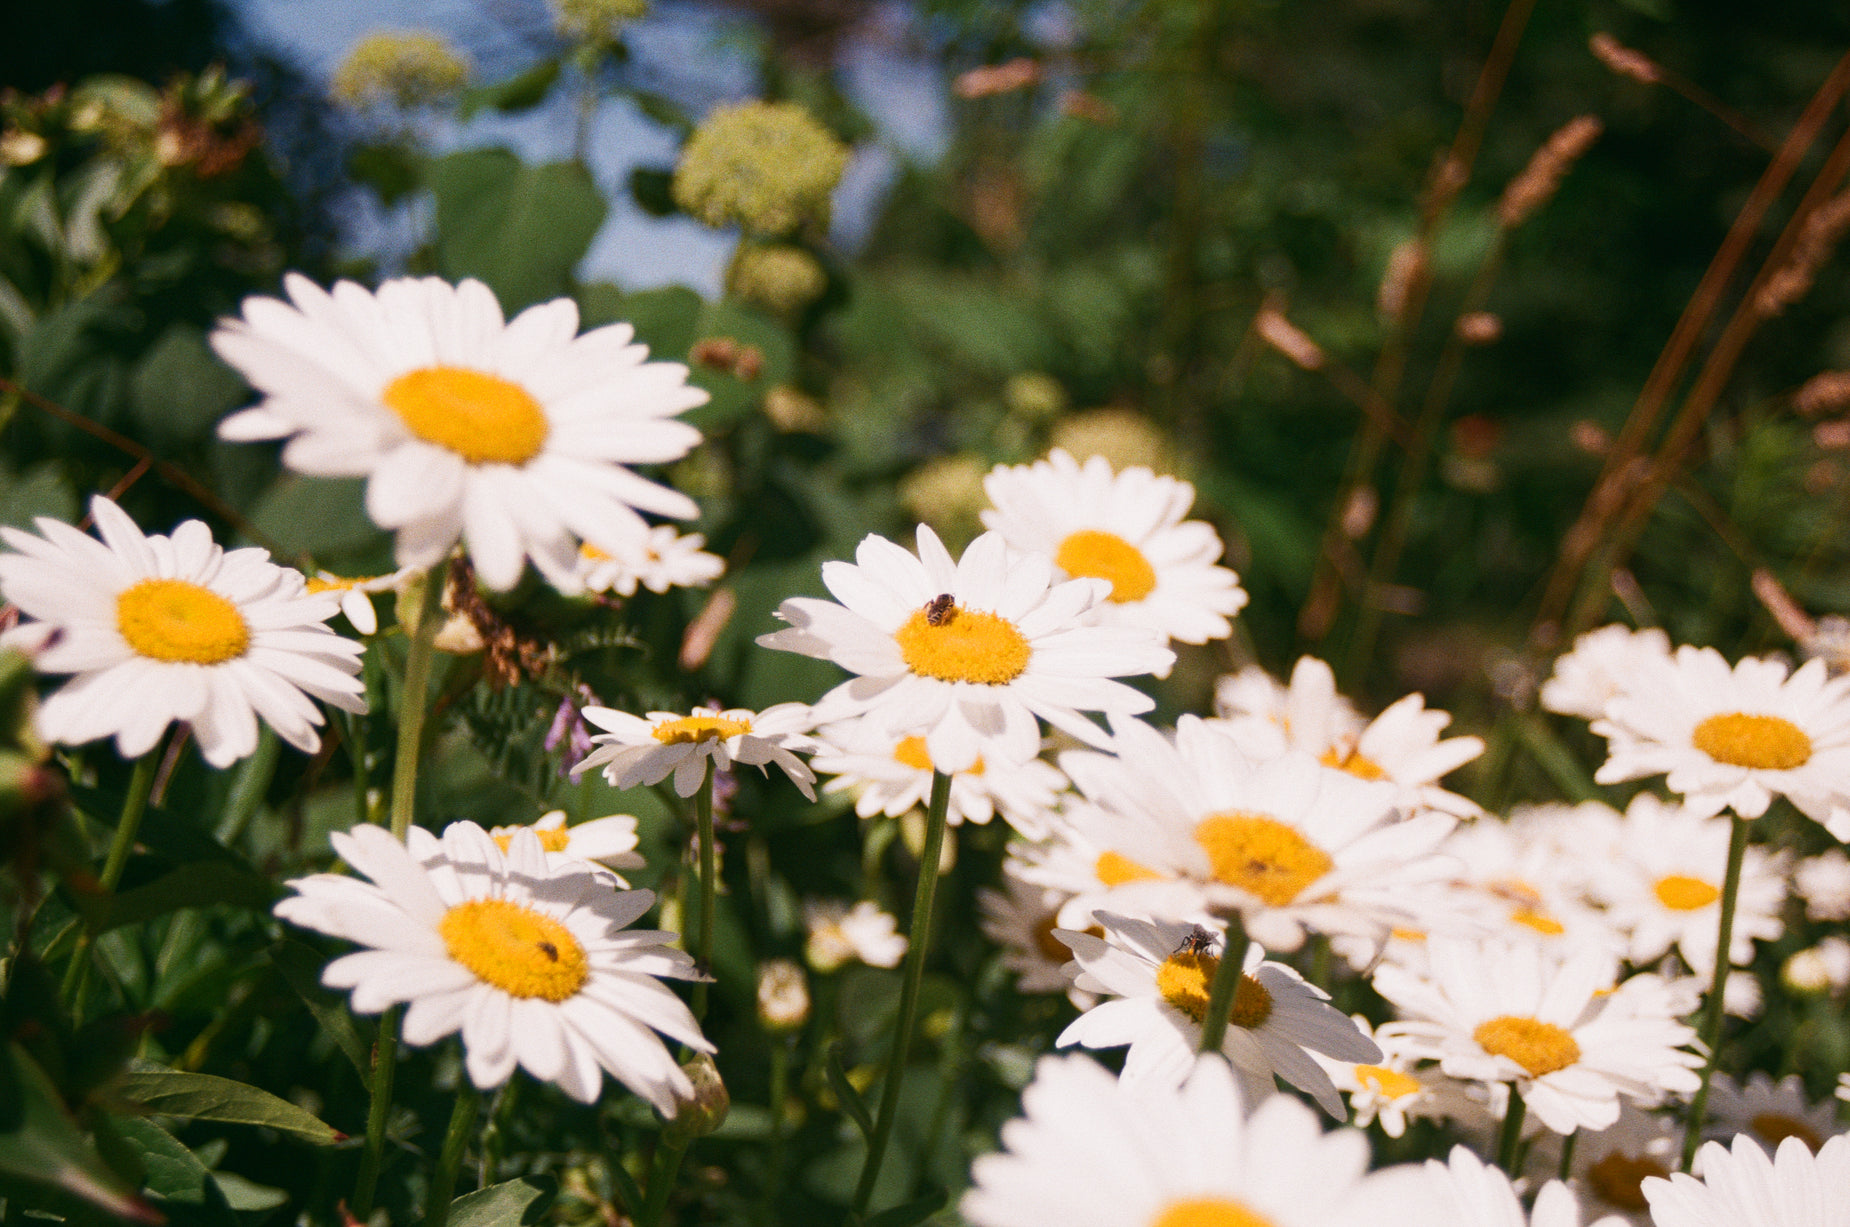 a bunch of white and yellow daisies in a garden